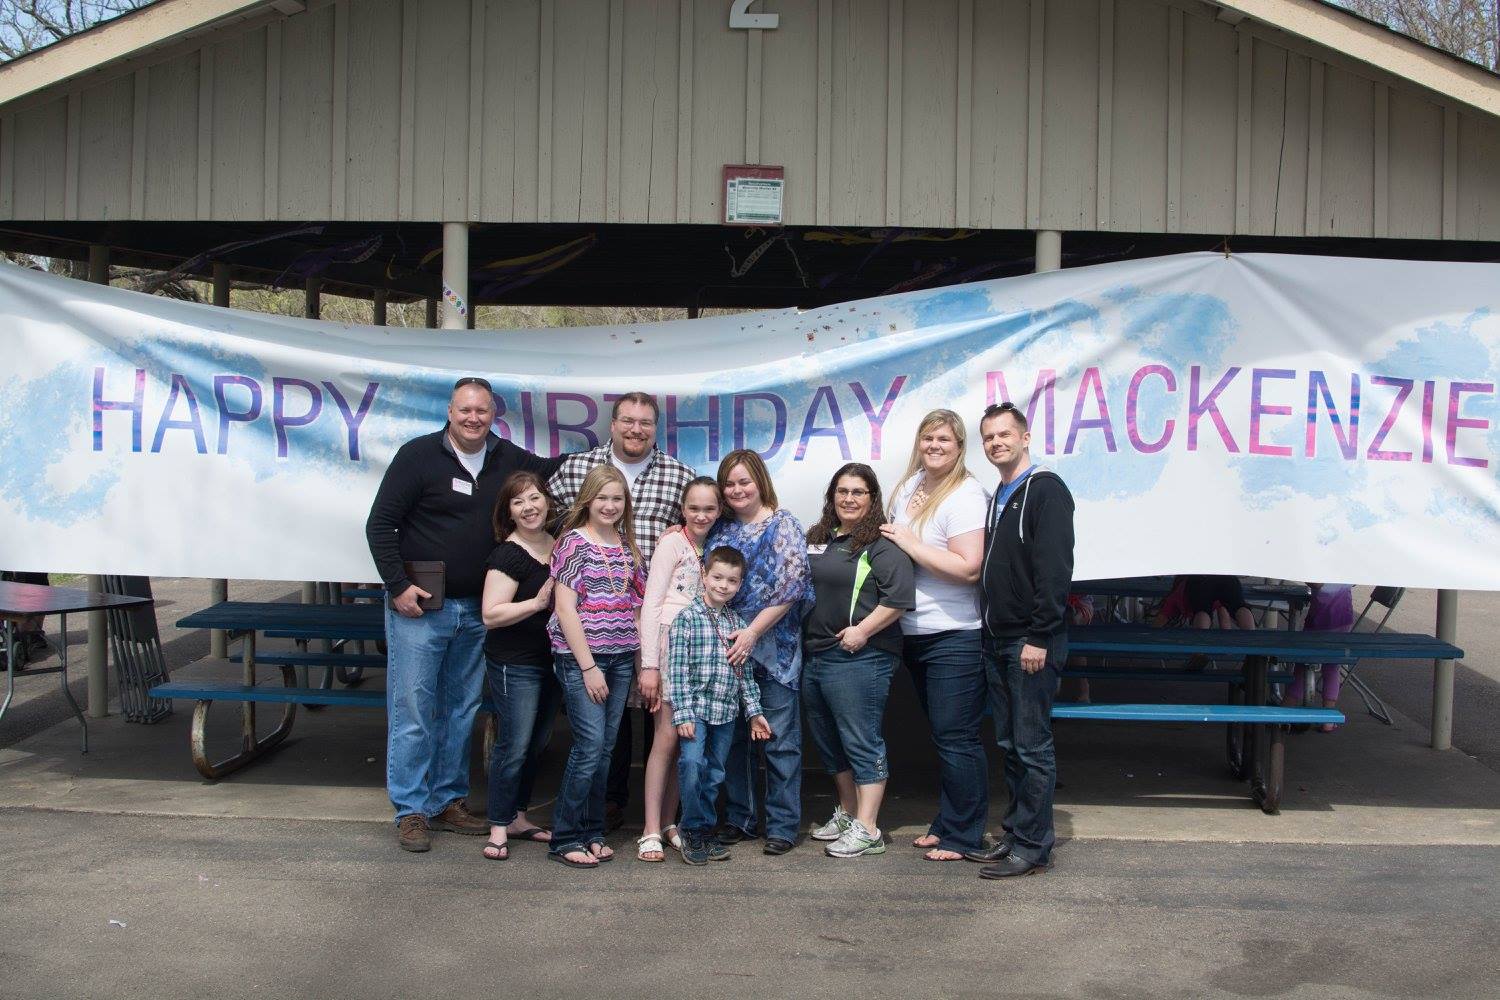 PHOTO: Hundreds of people from the Shakopee, Minn., community turned up for Mackenzie Moretter's birthday party on April 18, 2015.